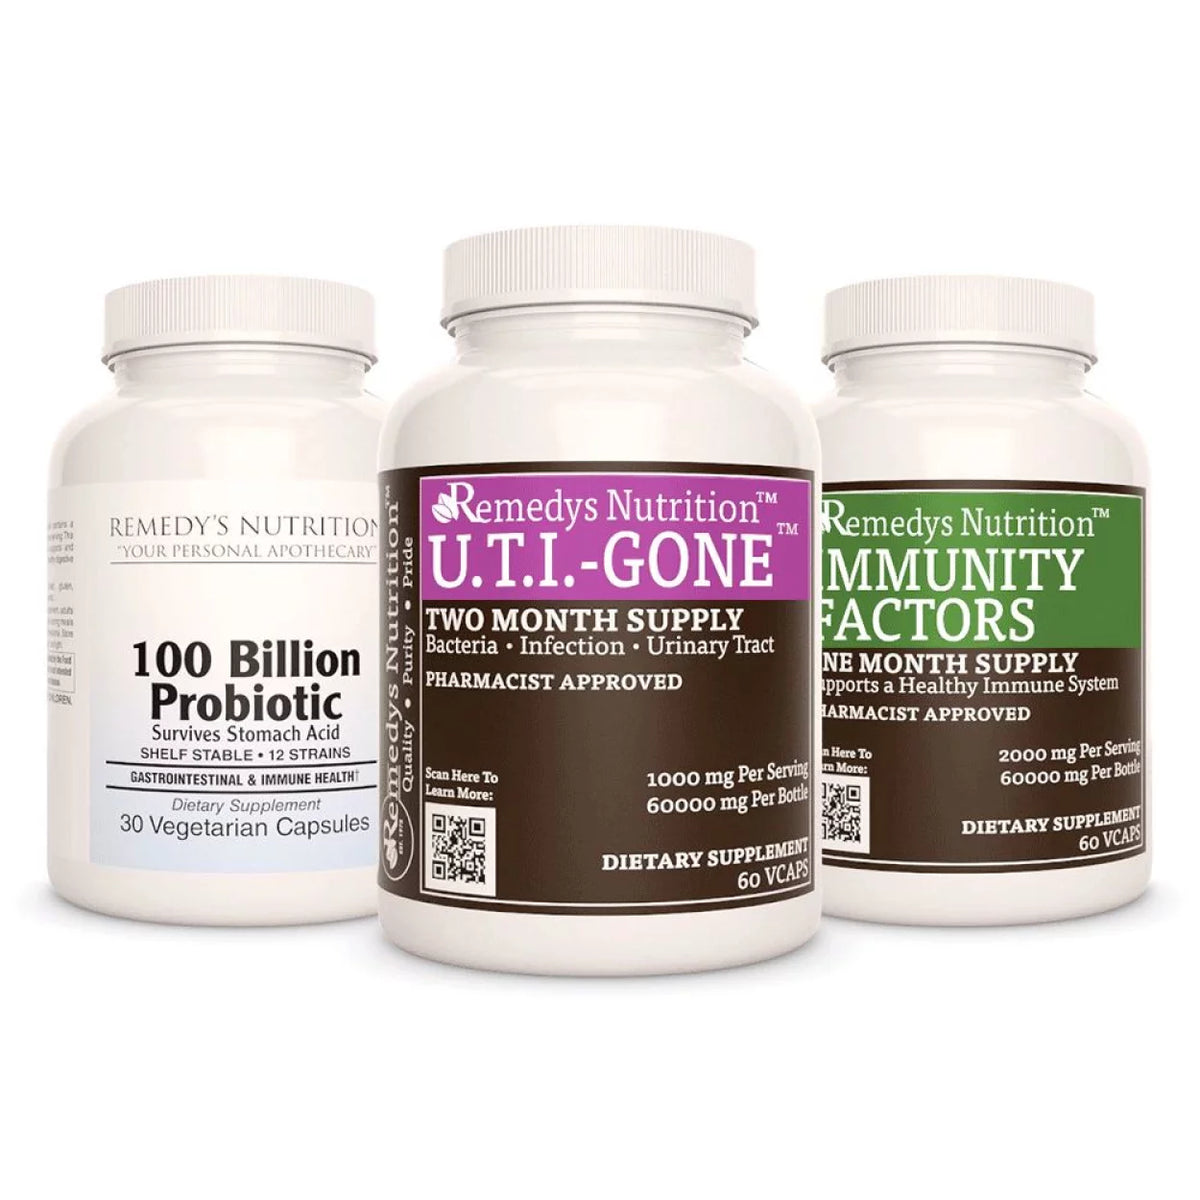 Image of Remedy's Nutrition® UTI Power Pack™ Power Pack contains 100 Billion Probiotic, UTI-Gone & Immunity Factors Capsules. 